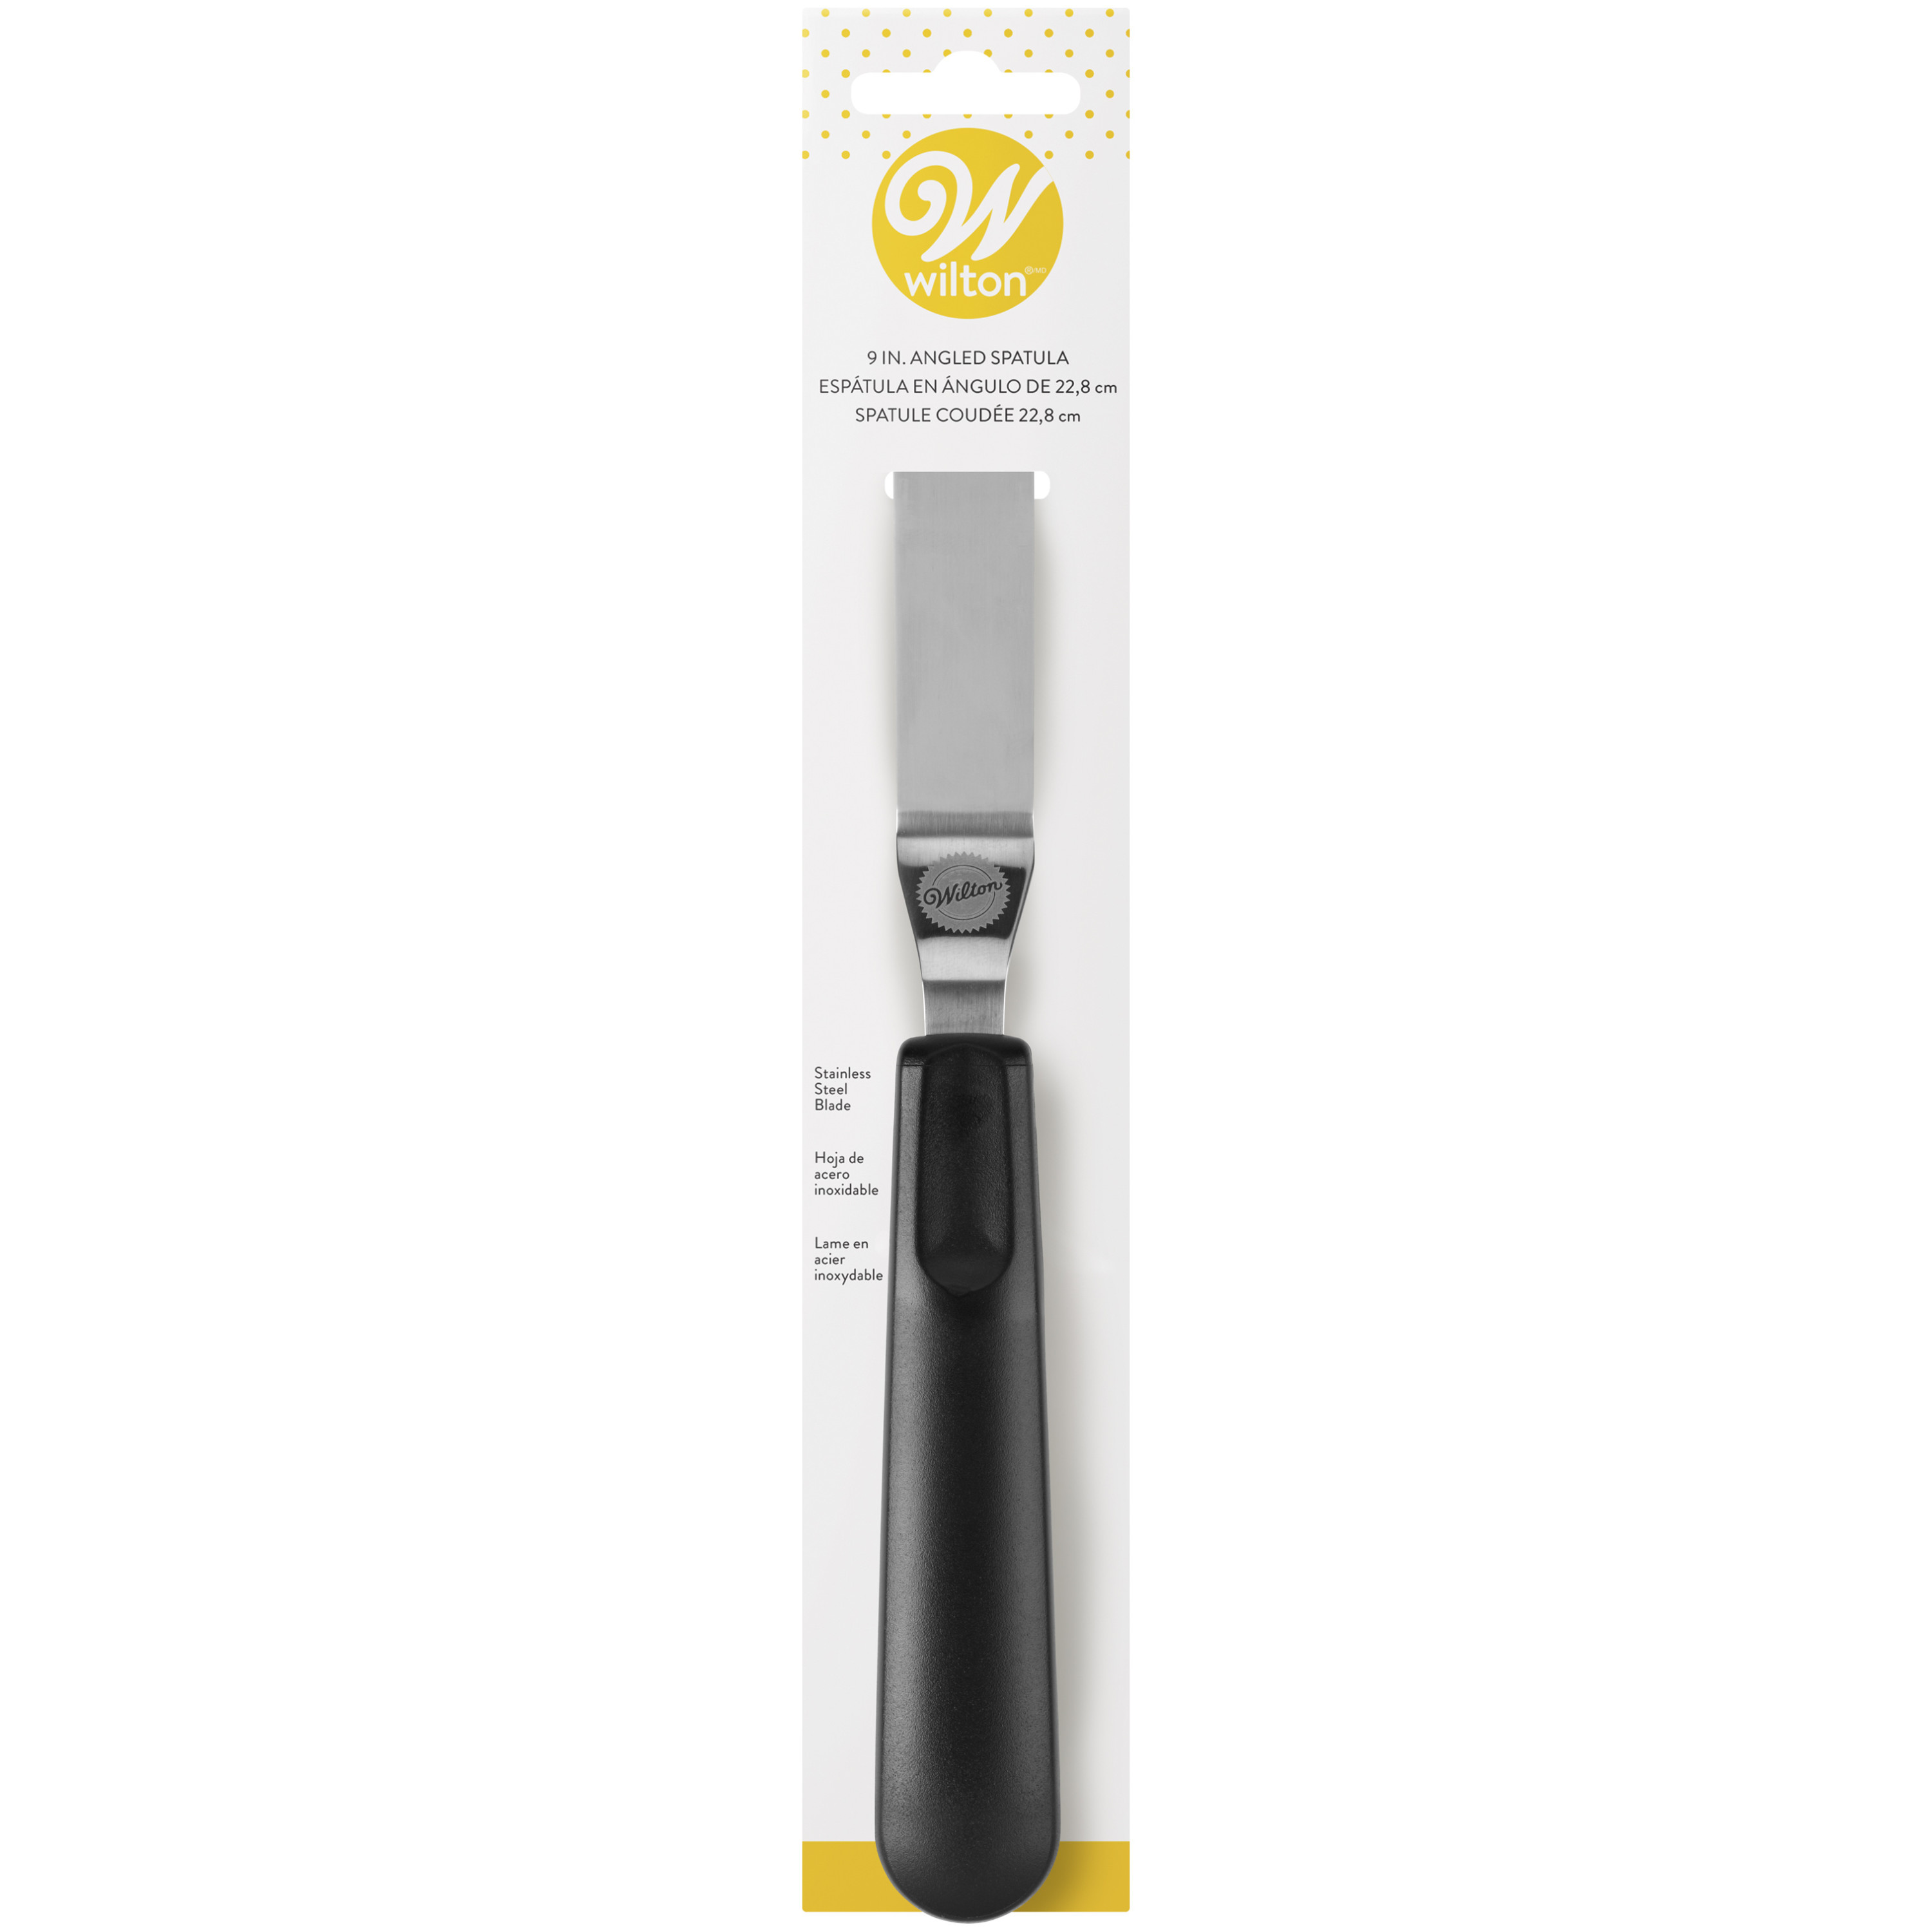 Wilton Angled Icing Spatula with Black Handle, 9-Inch - image 2 of 6